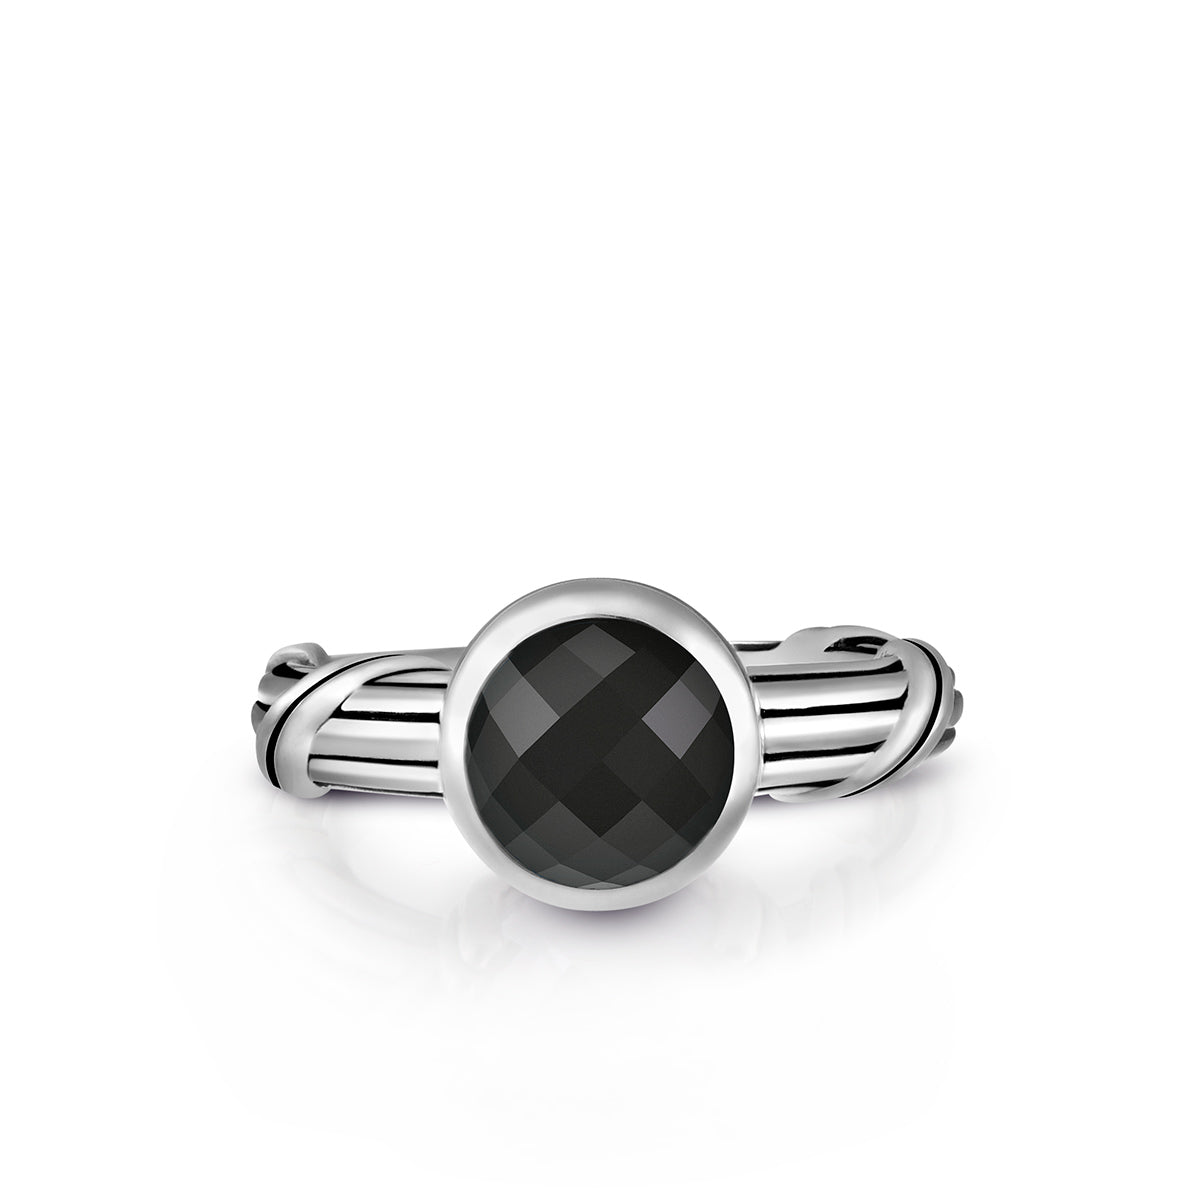 Fantasies Black Onyx Solitaire Ring in sterling silver